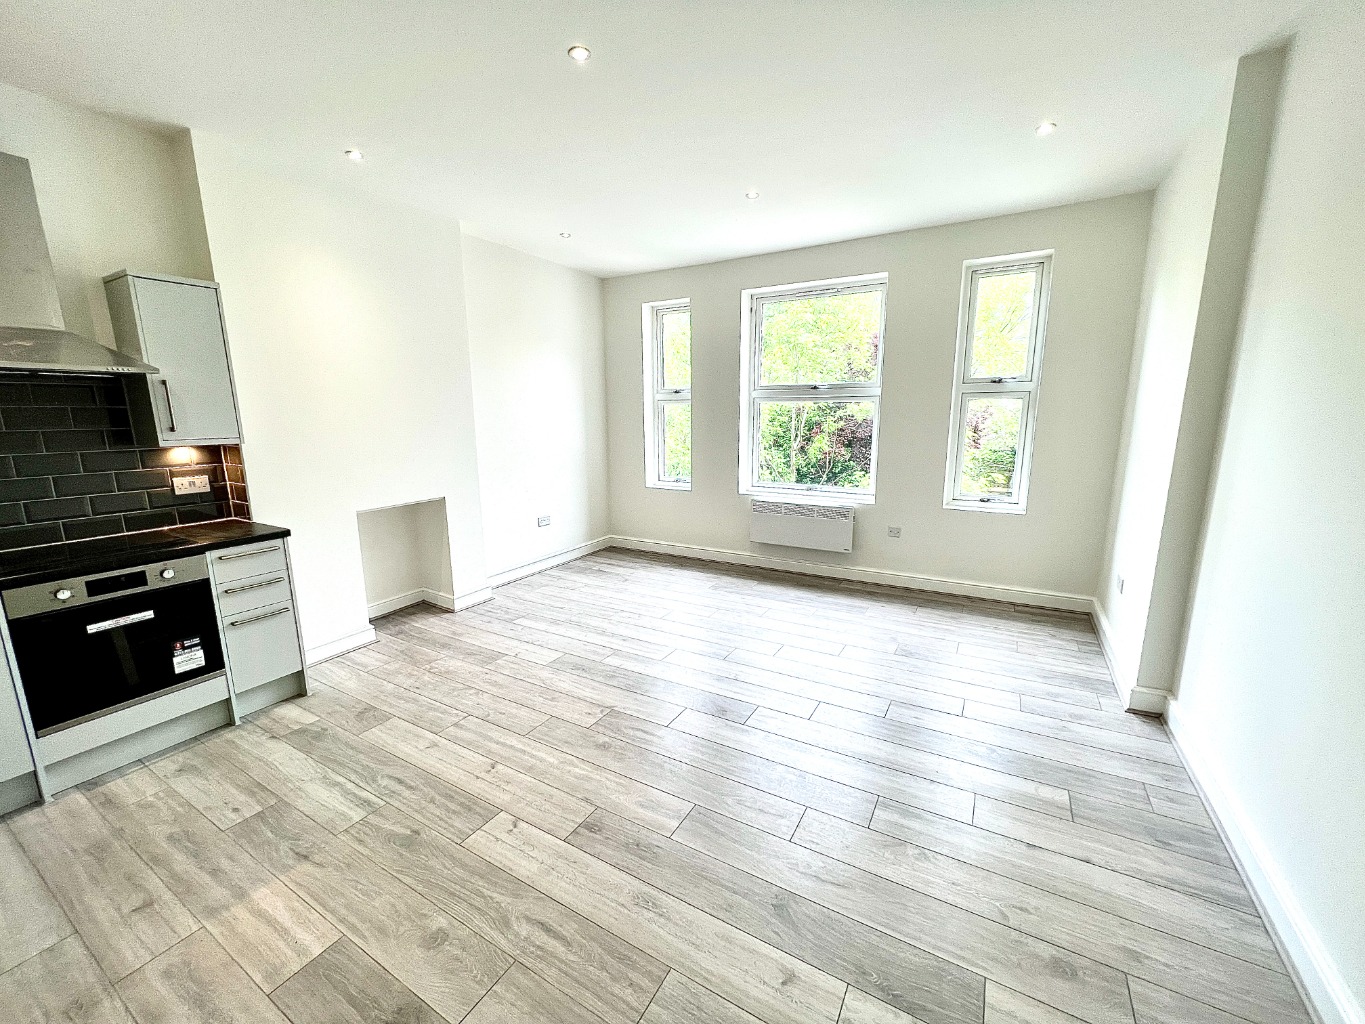 A stunning two bedroomed first floor flat to rent on Sidcup Road Eltham. These properties are brand new and offer a high specification throughout.